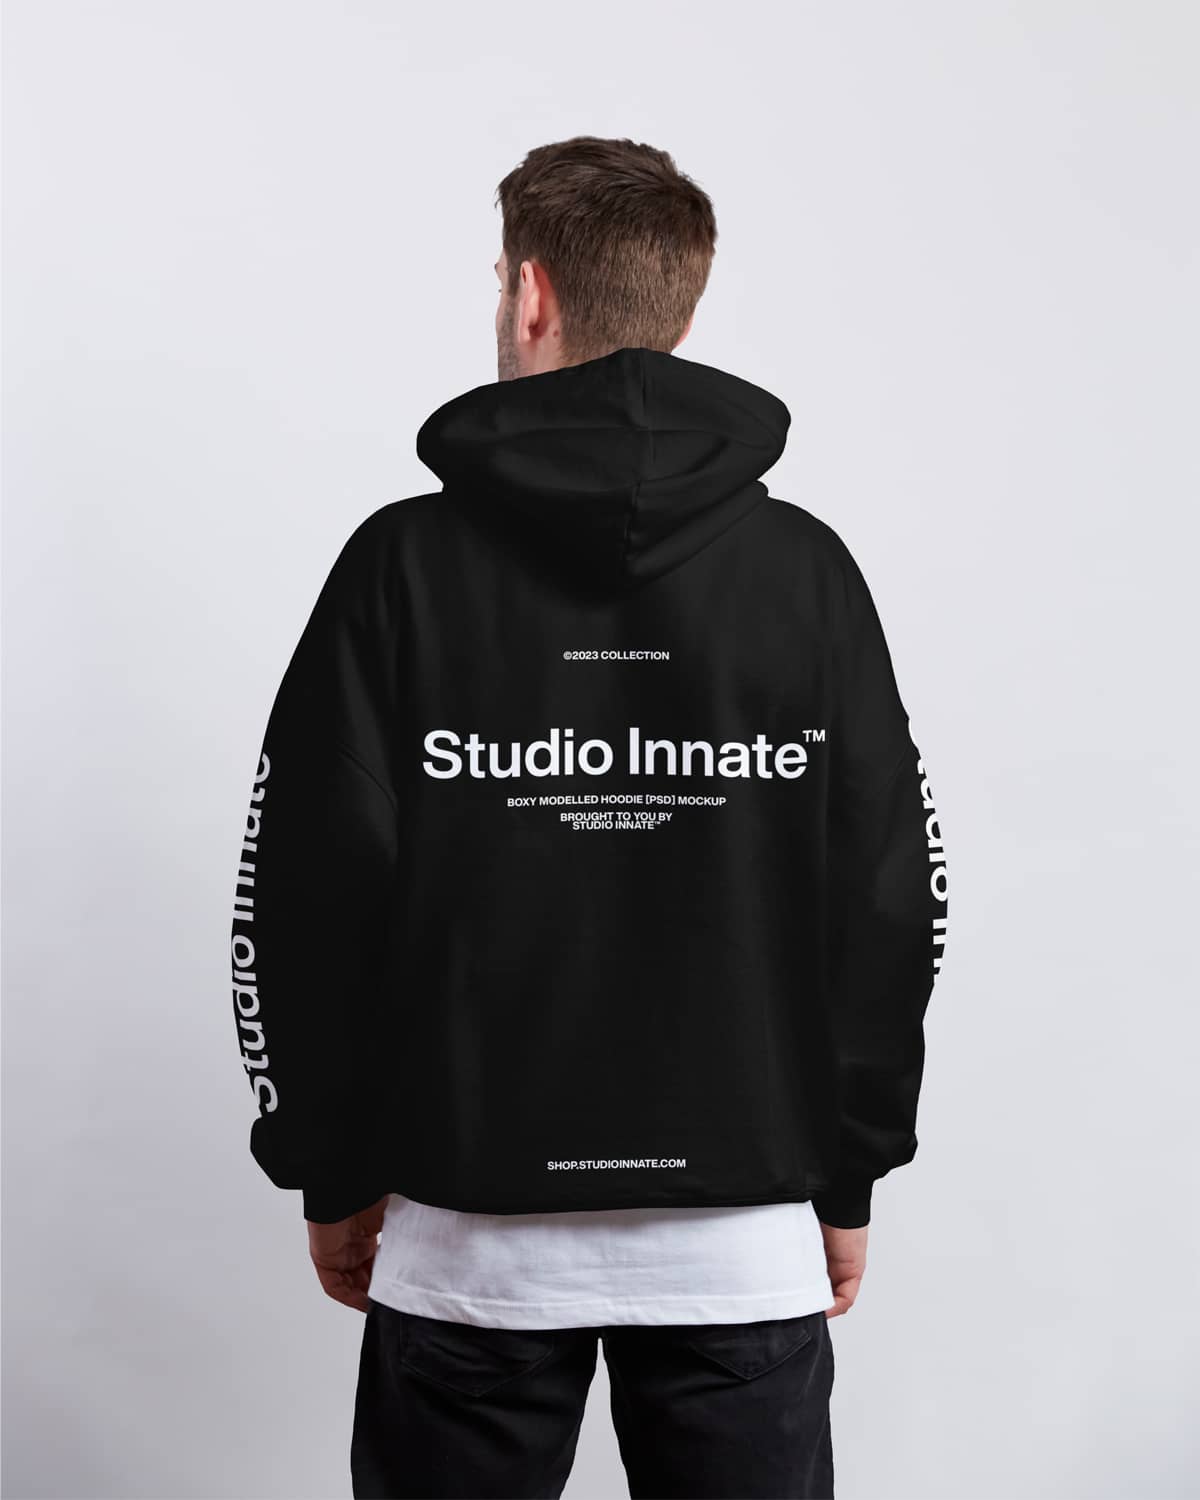 Modelled Boxy Hoodie Mockup: Bring Your Designs to Life with Realistic ...